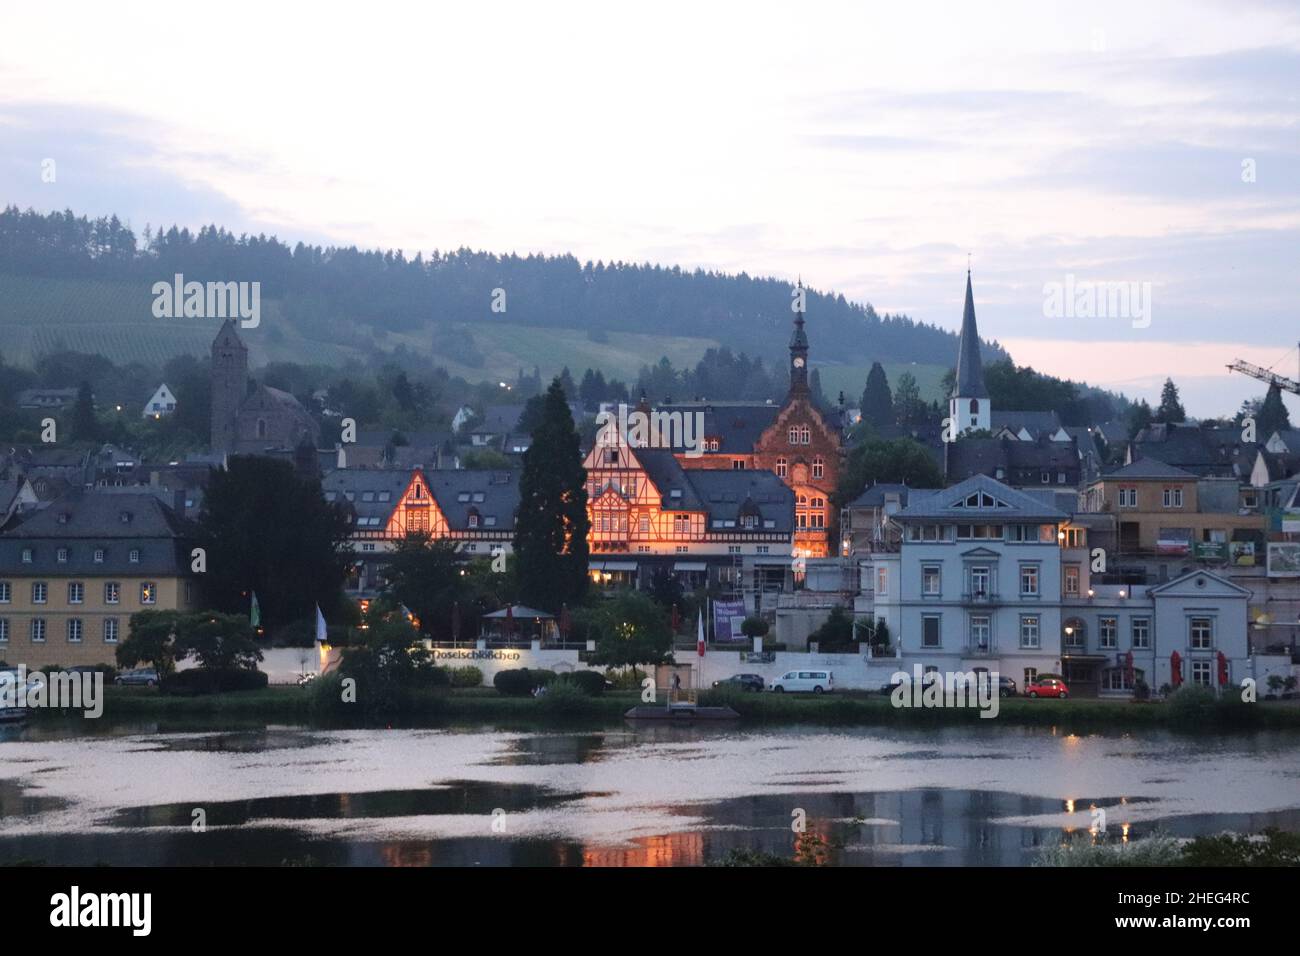 Traben-Trarbach, Germany along the Mosel River at Sunset Stock Photo